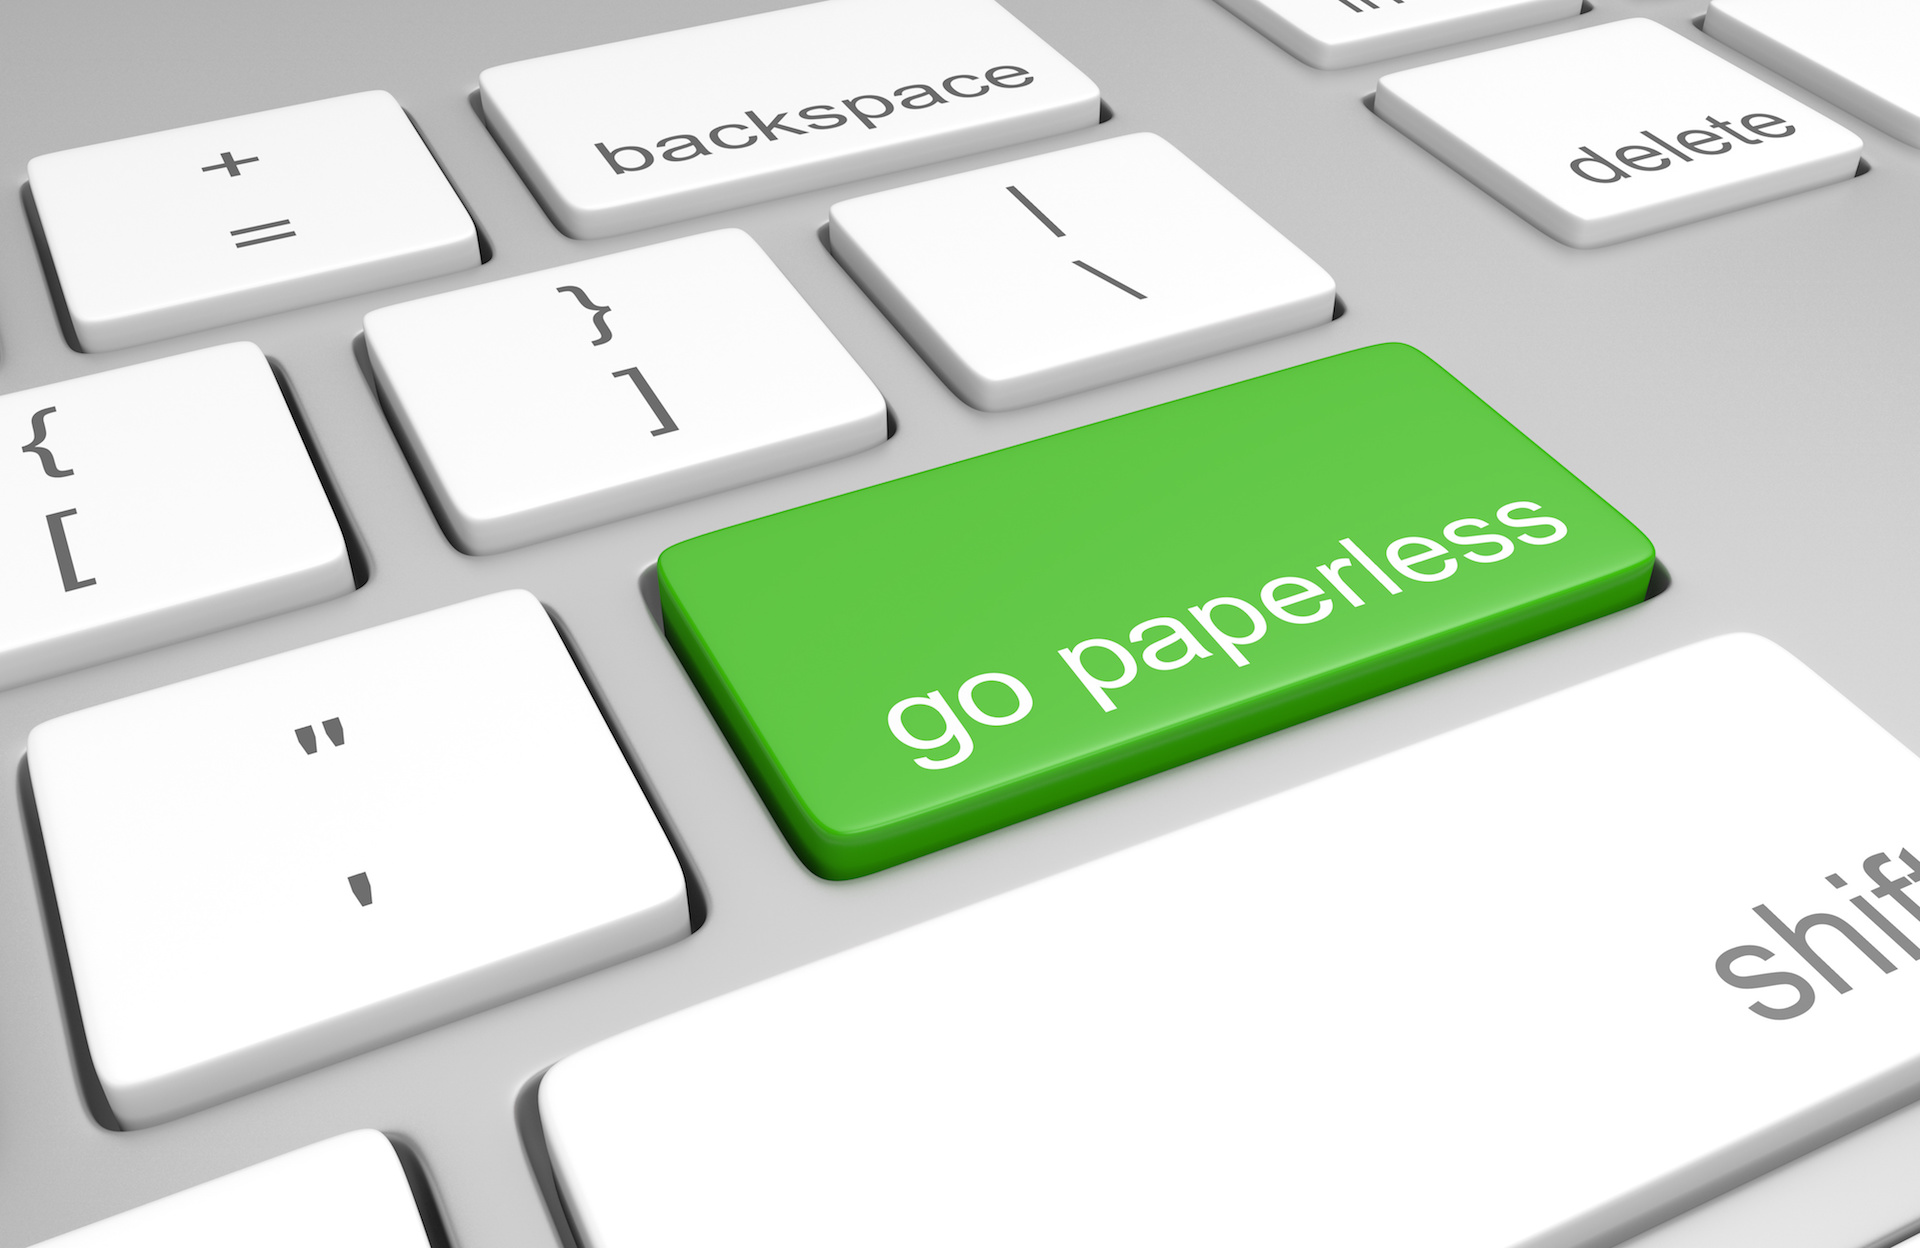 Go paperless key on a computer keyboard